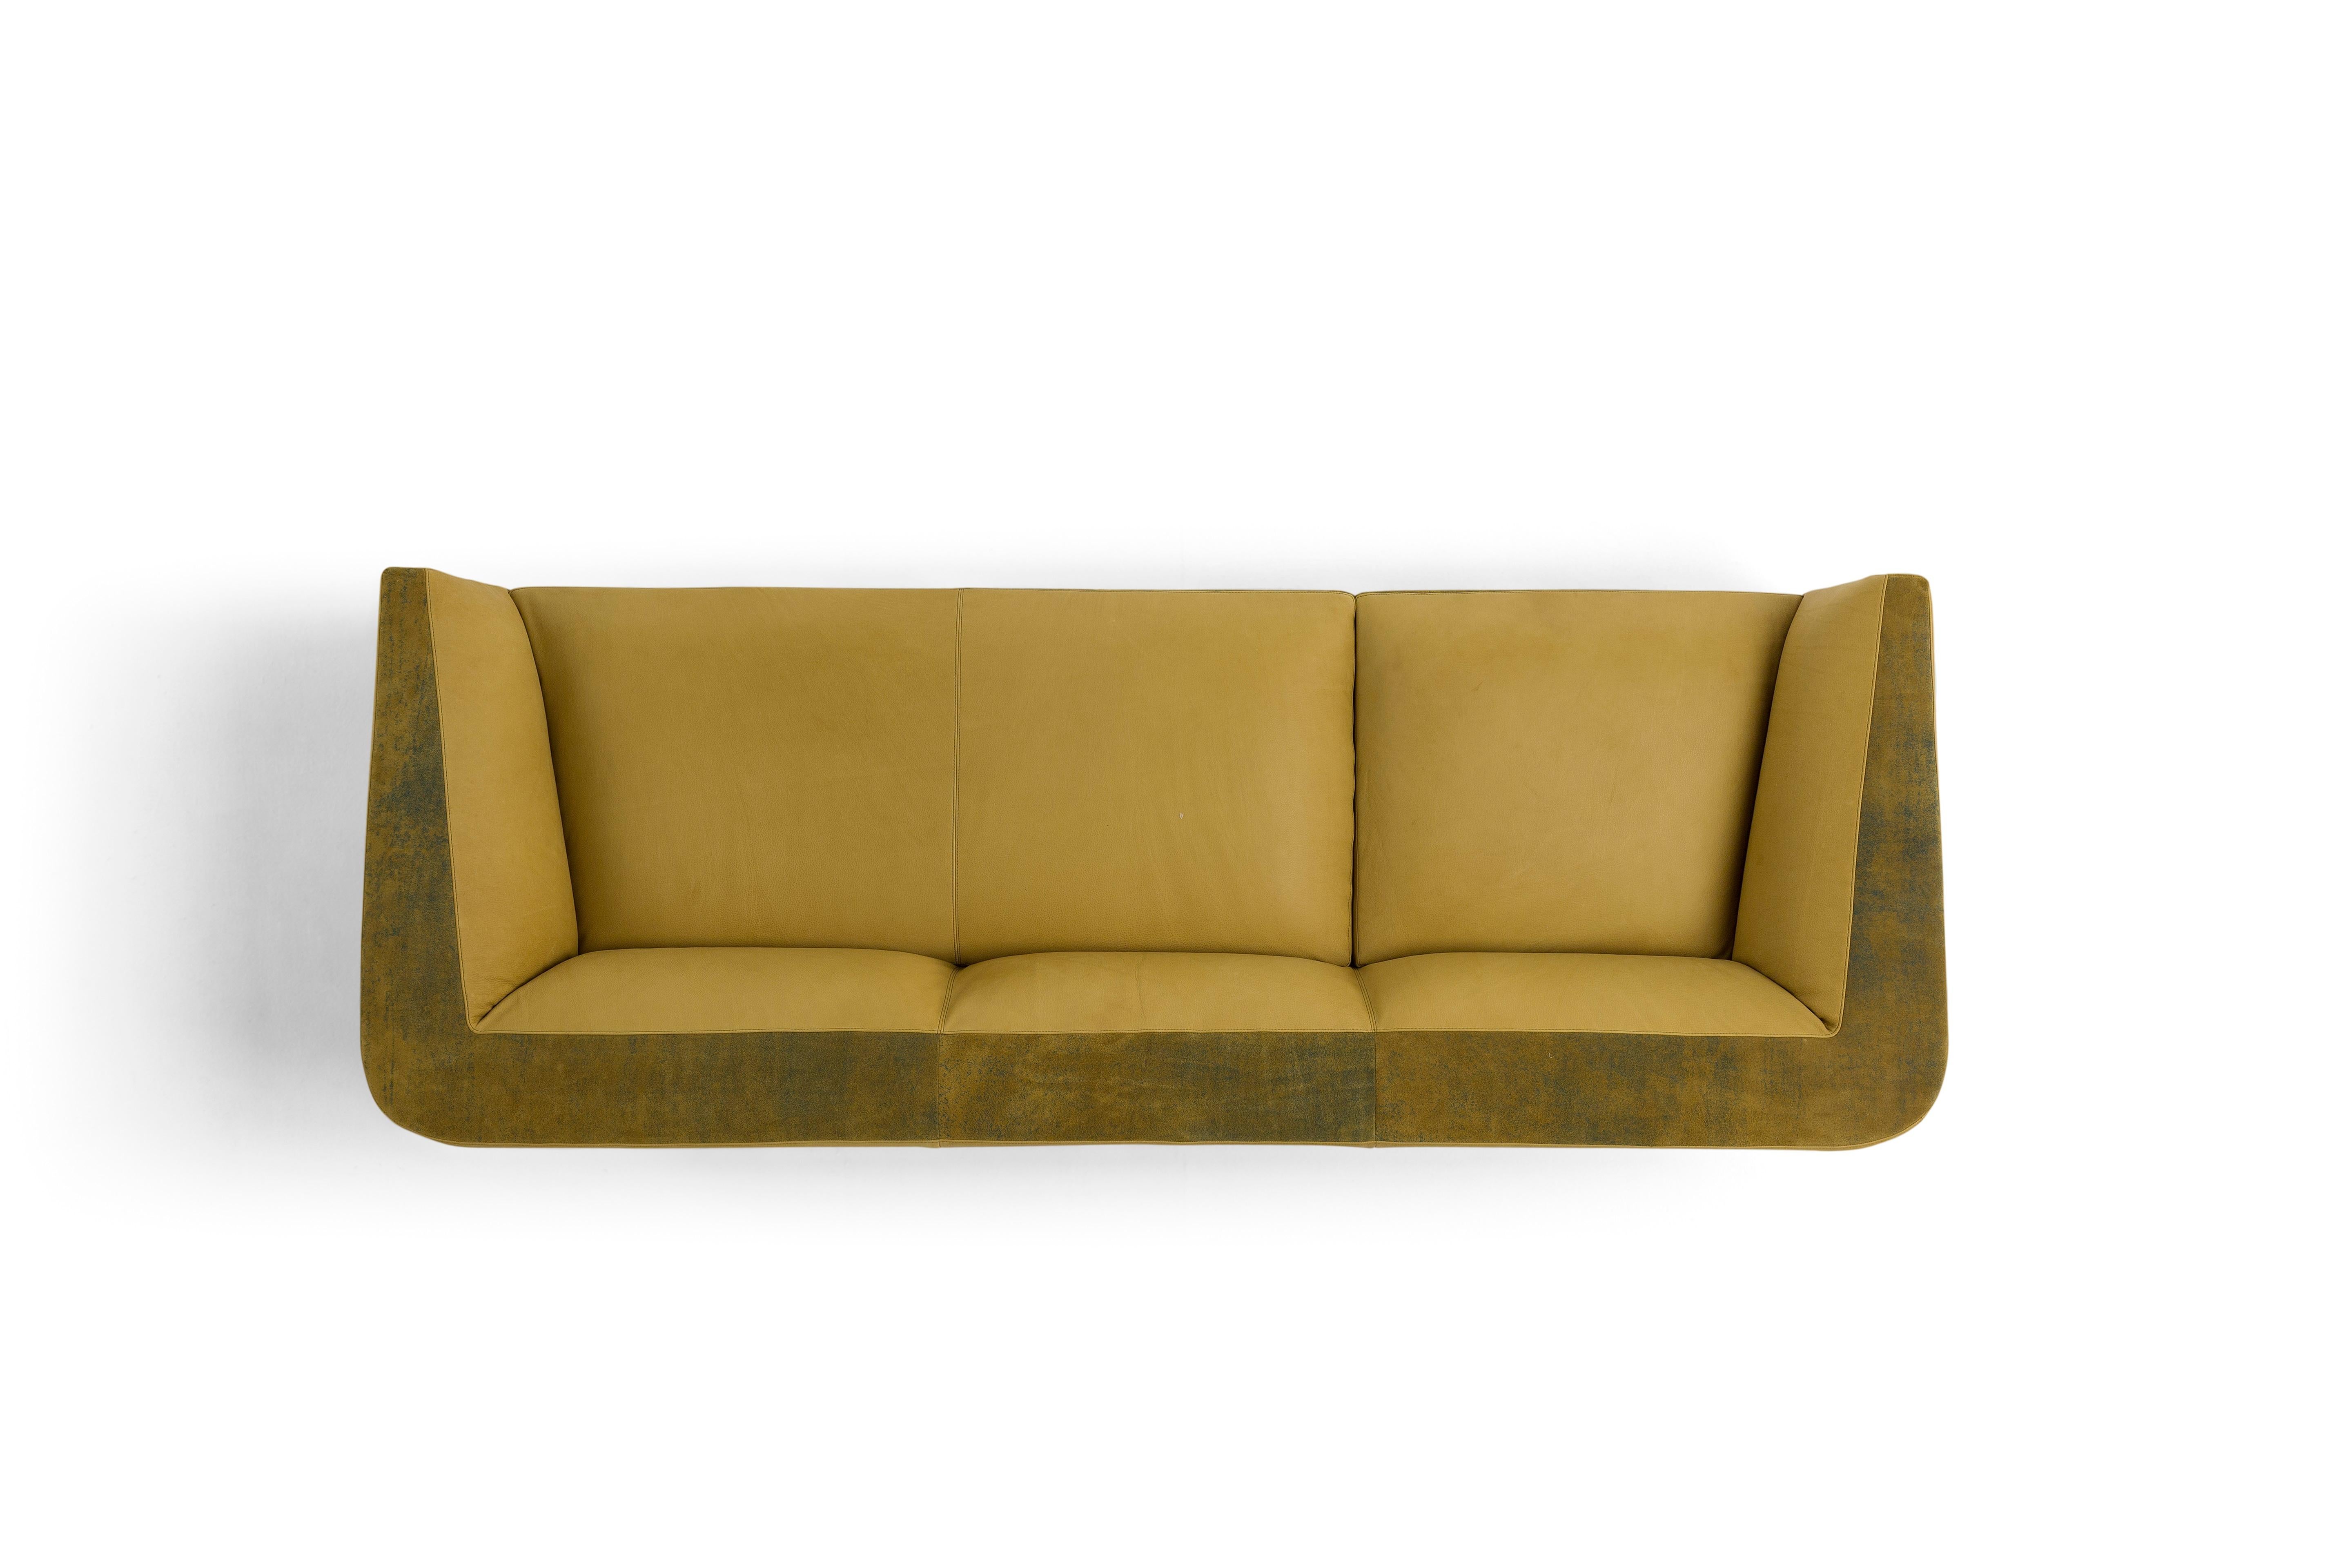 Hand-Crafted Panis Four-Seat Leather Sofa in Yellow by Emanuel Gargano & Anton Cristell For Sale